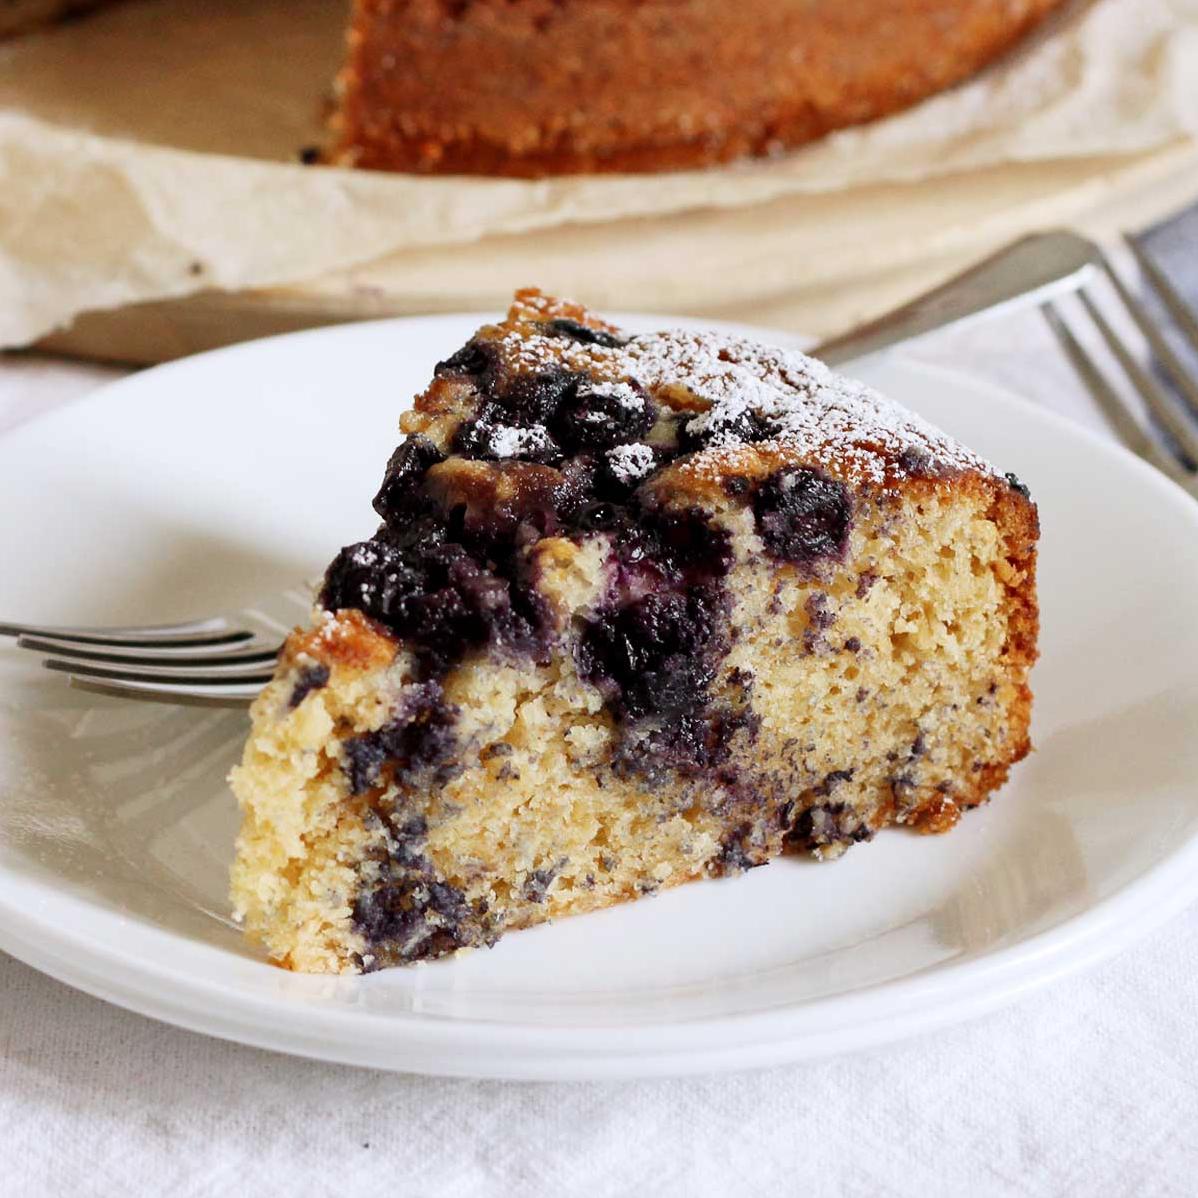  Blueberries, butter, and a maple glaze - a heavenly combination in a single bite!